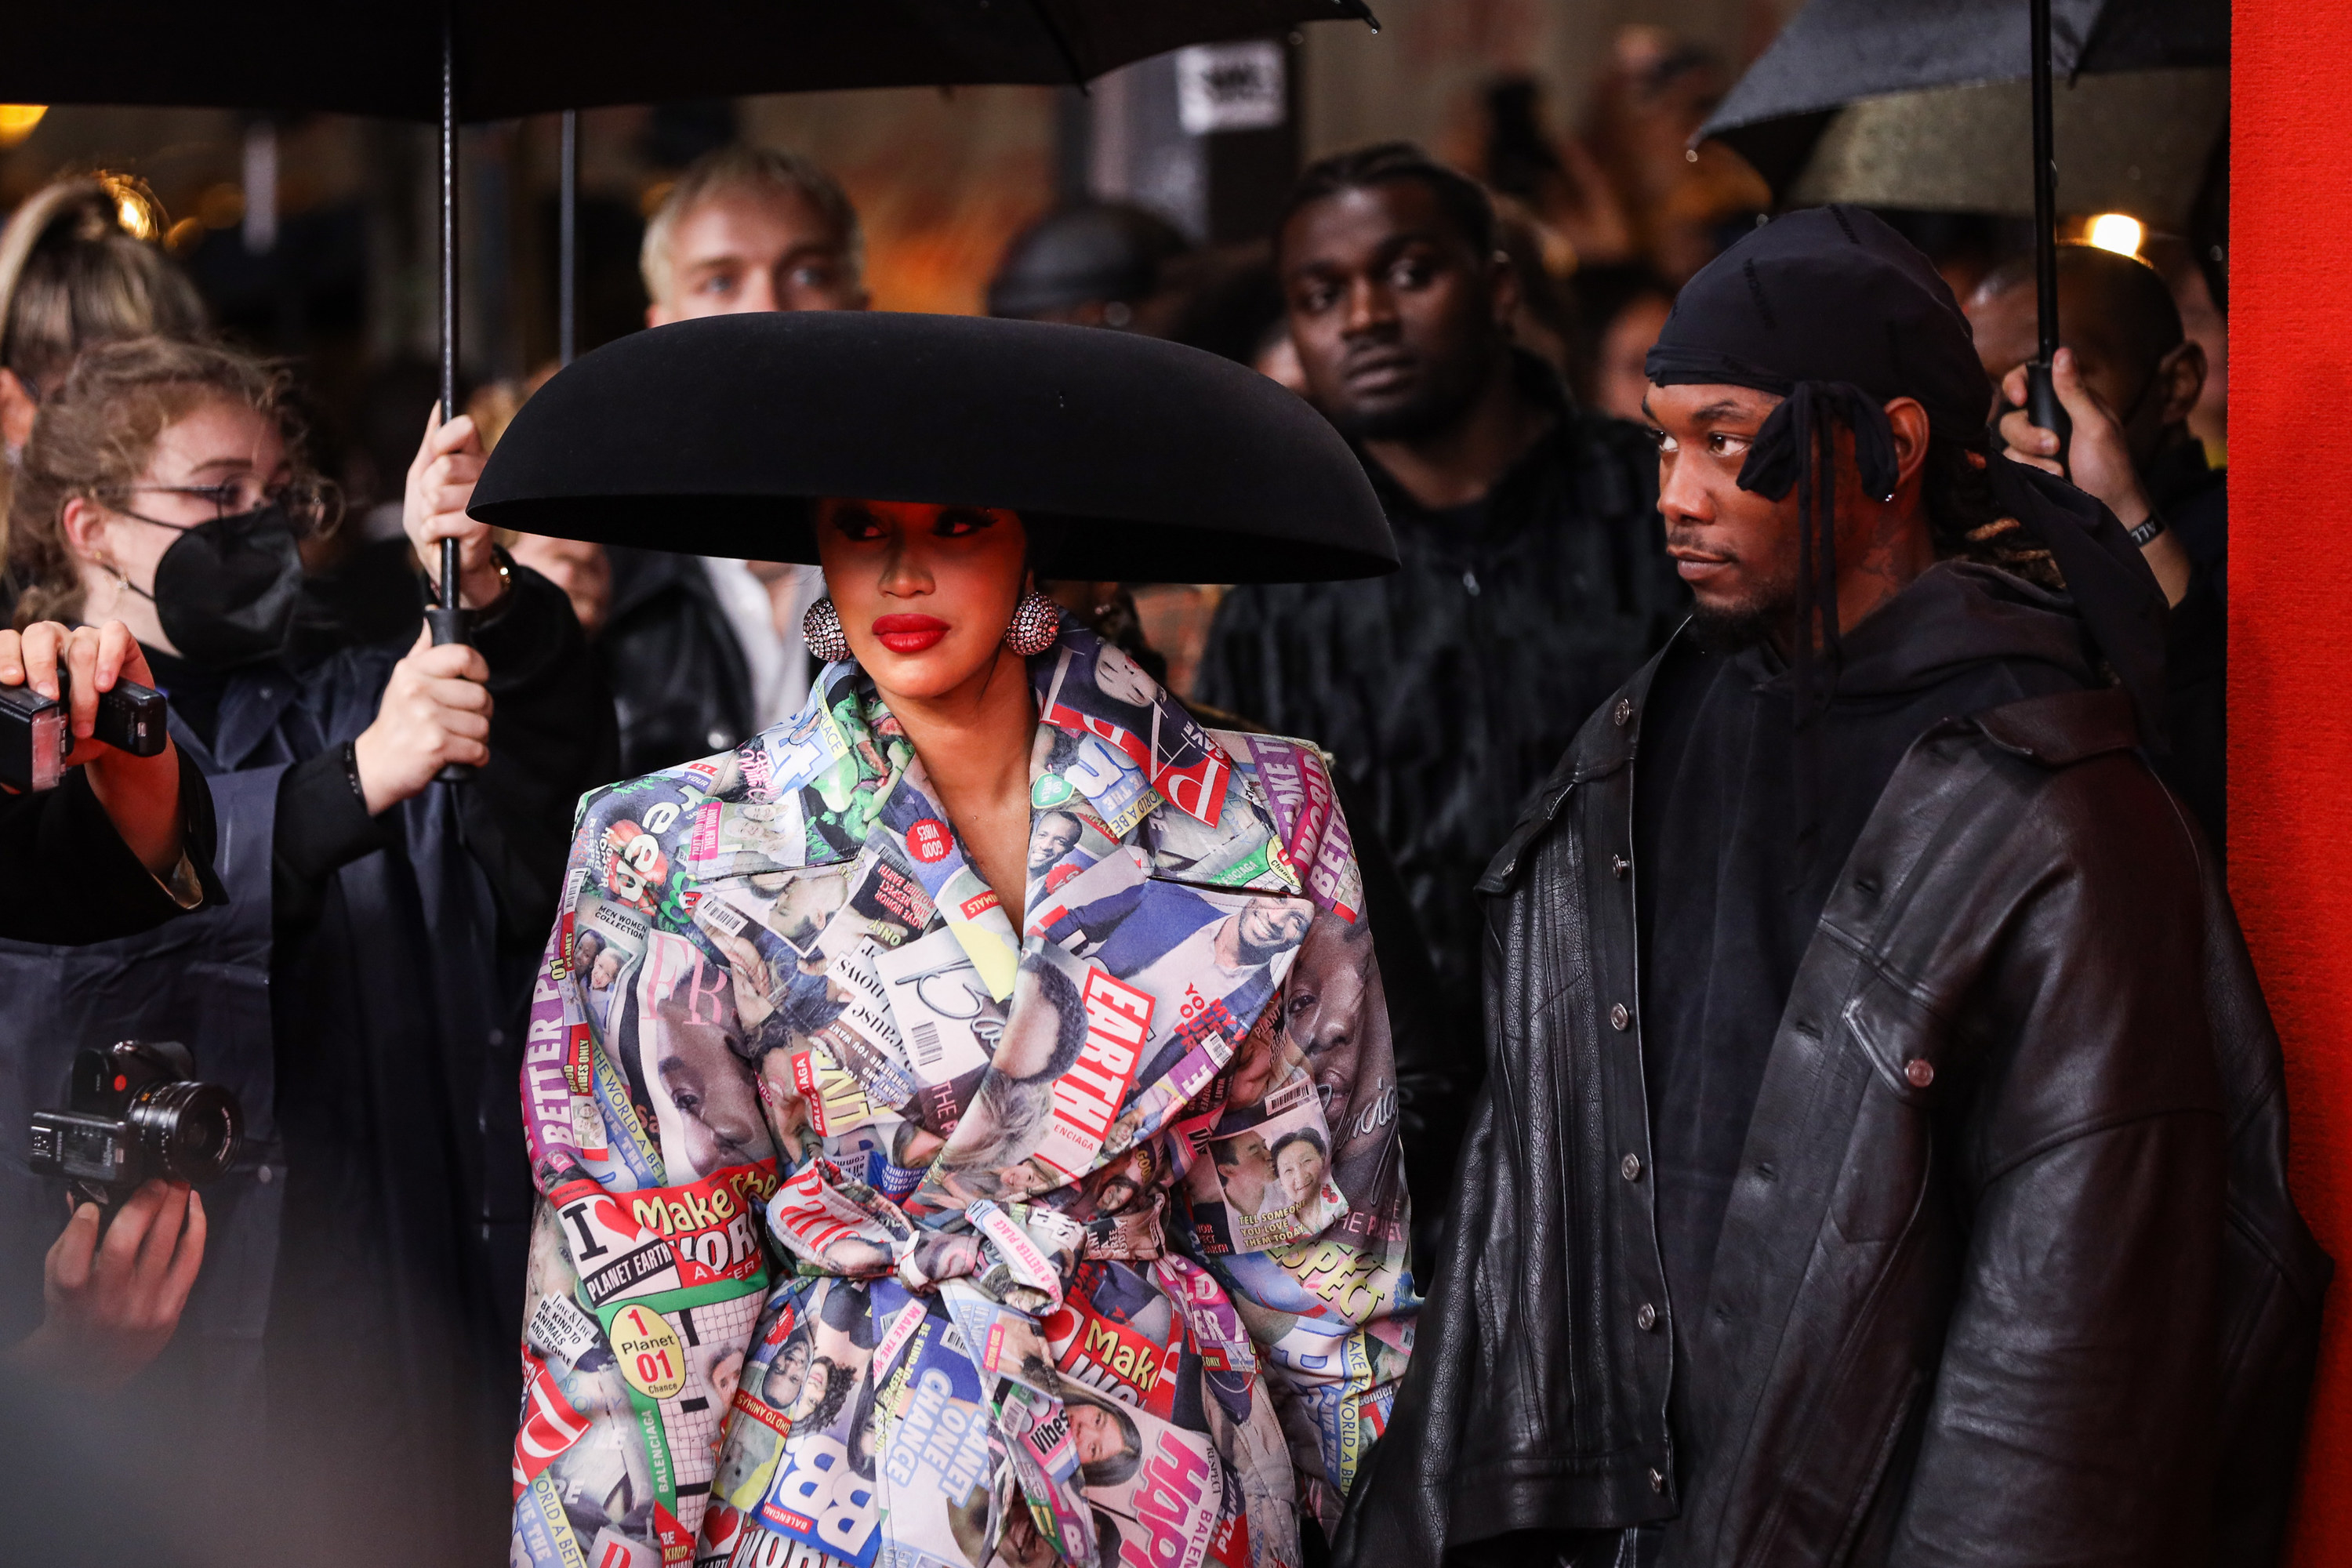 Cardi B and Offset standing under umbrellas and surrounded by a crowd of people